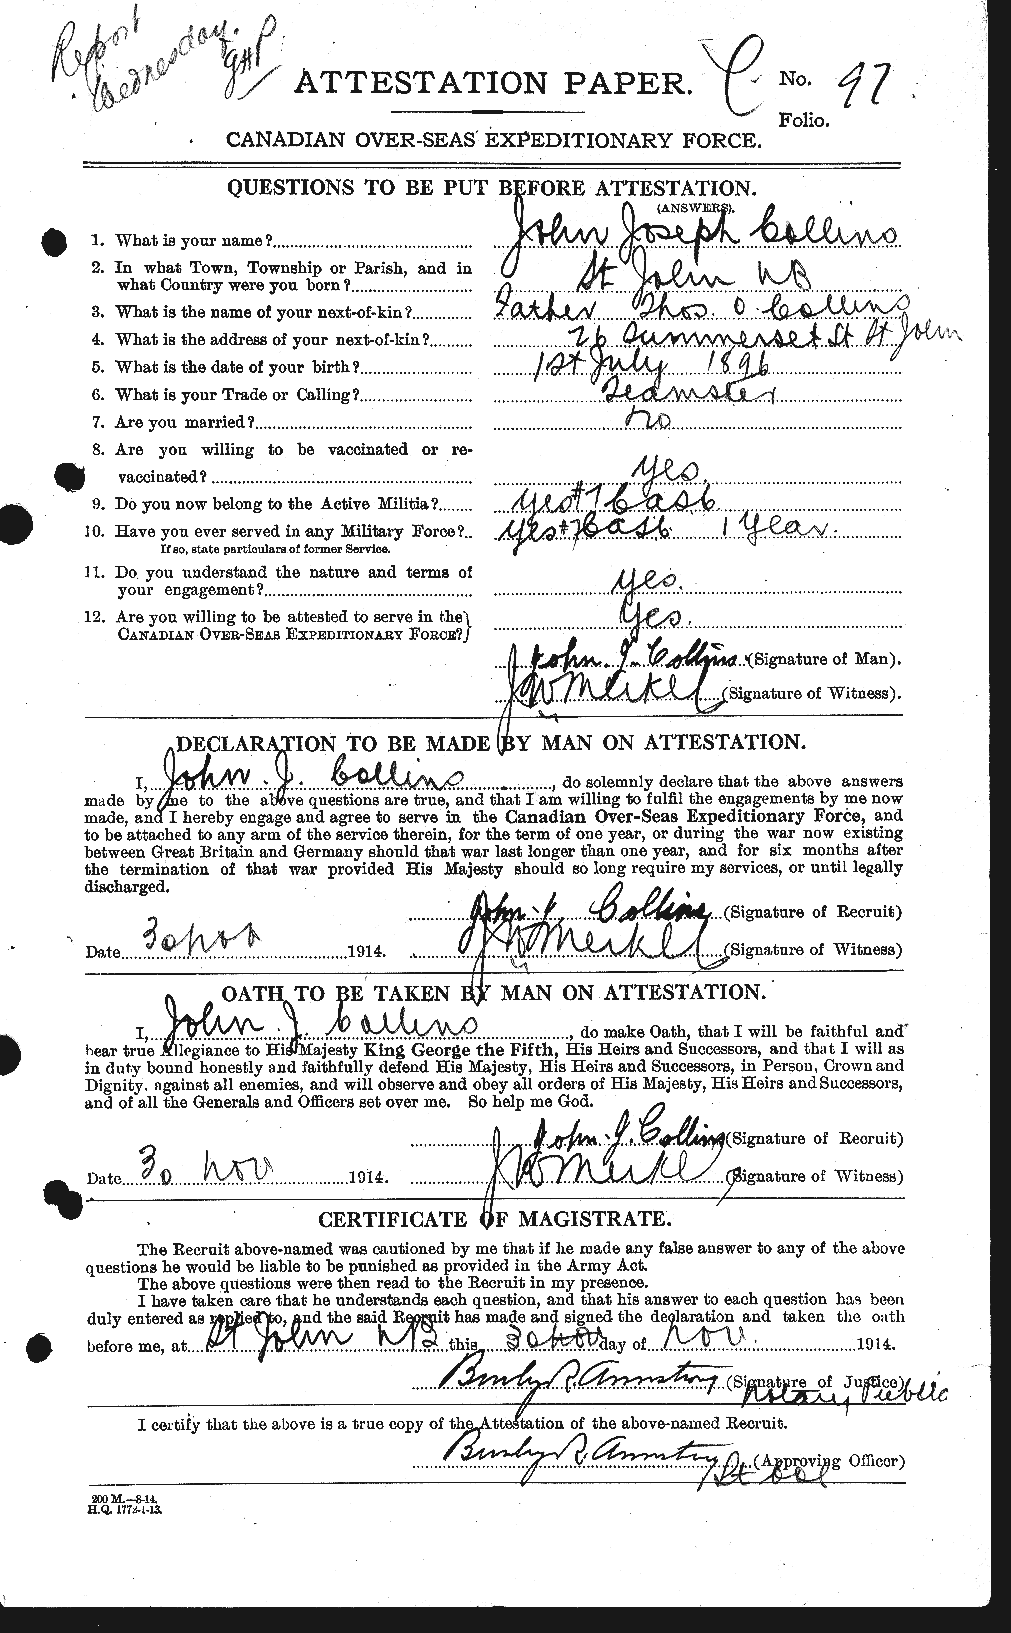 Personnel Records of the First World War - CEF 069549a